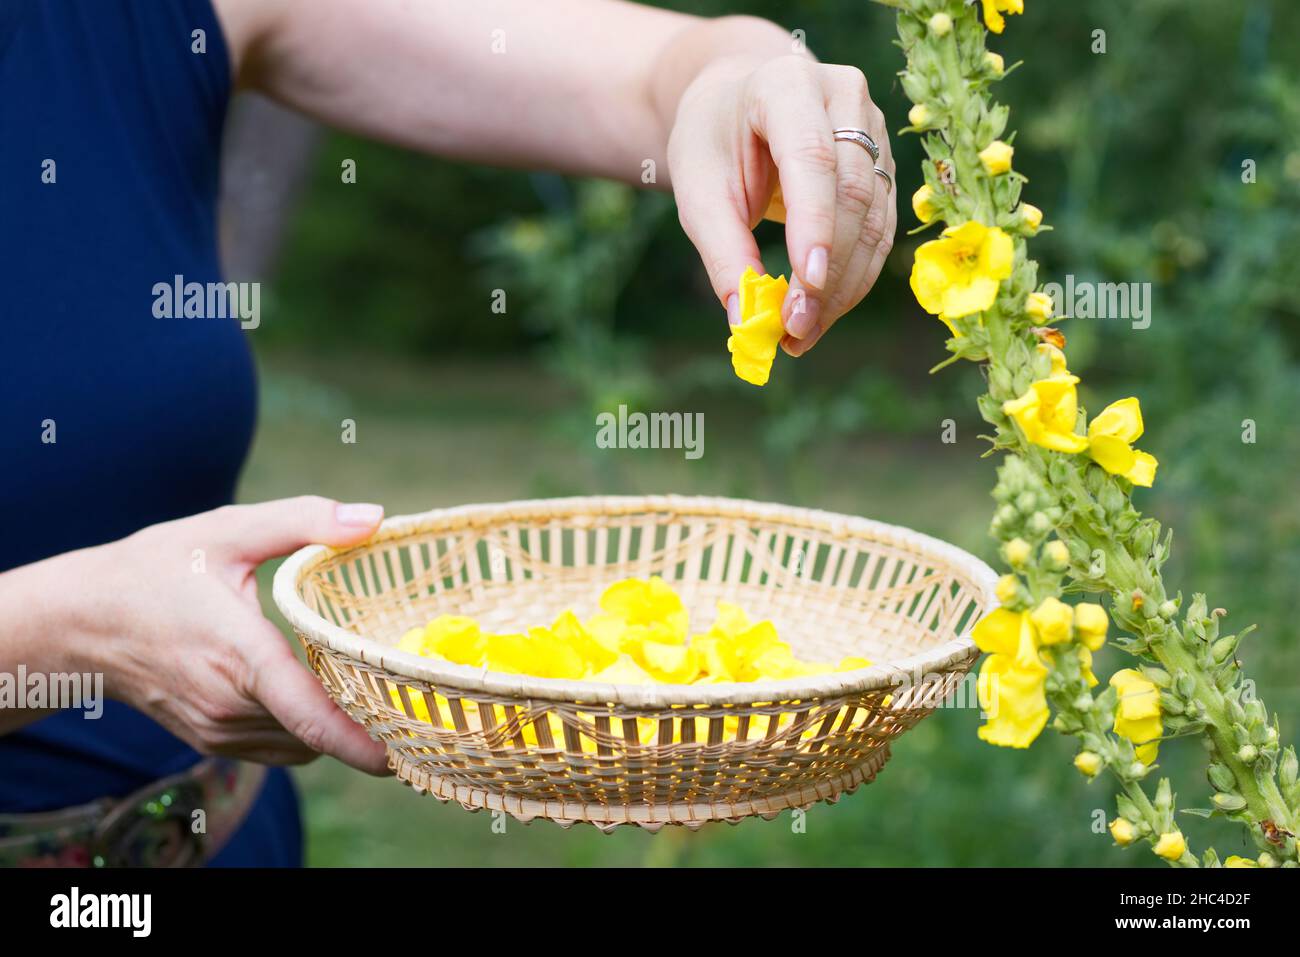 Woman collect mullein flowers to a wicker basket. Yellow verbascum in the garden. Stock Photo